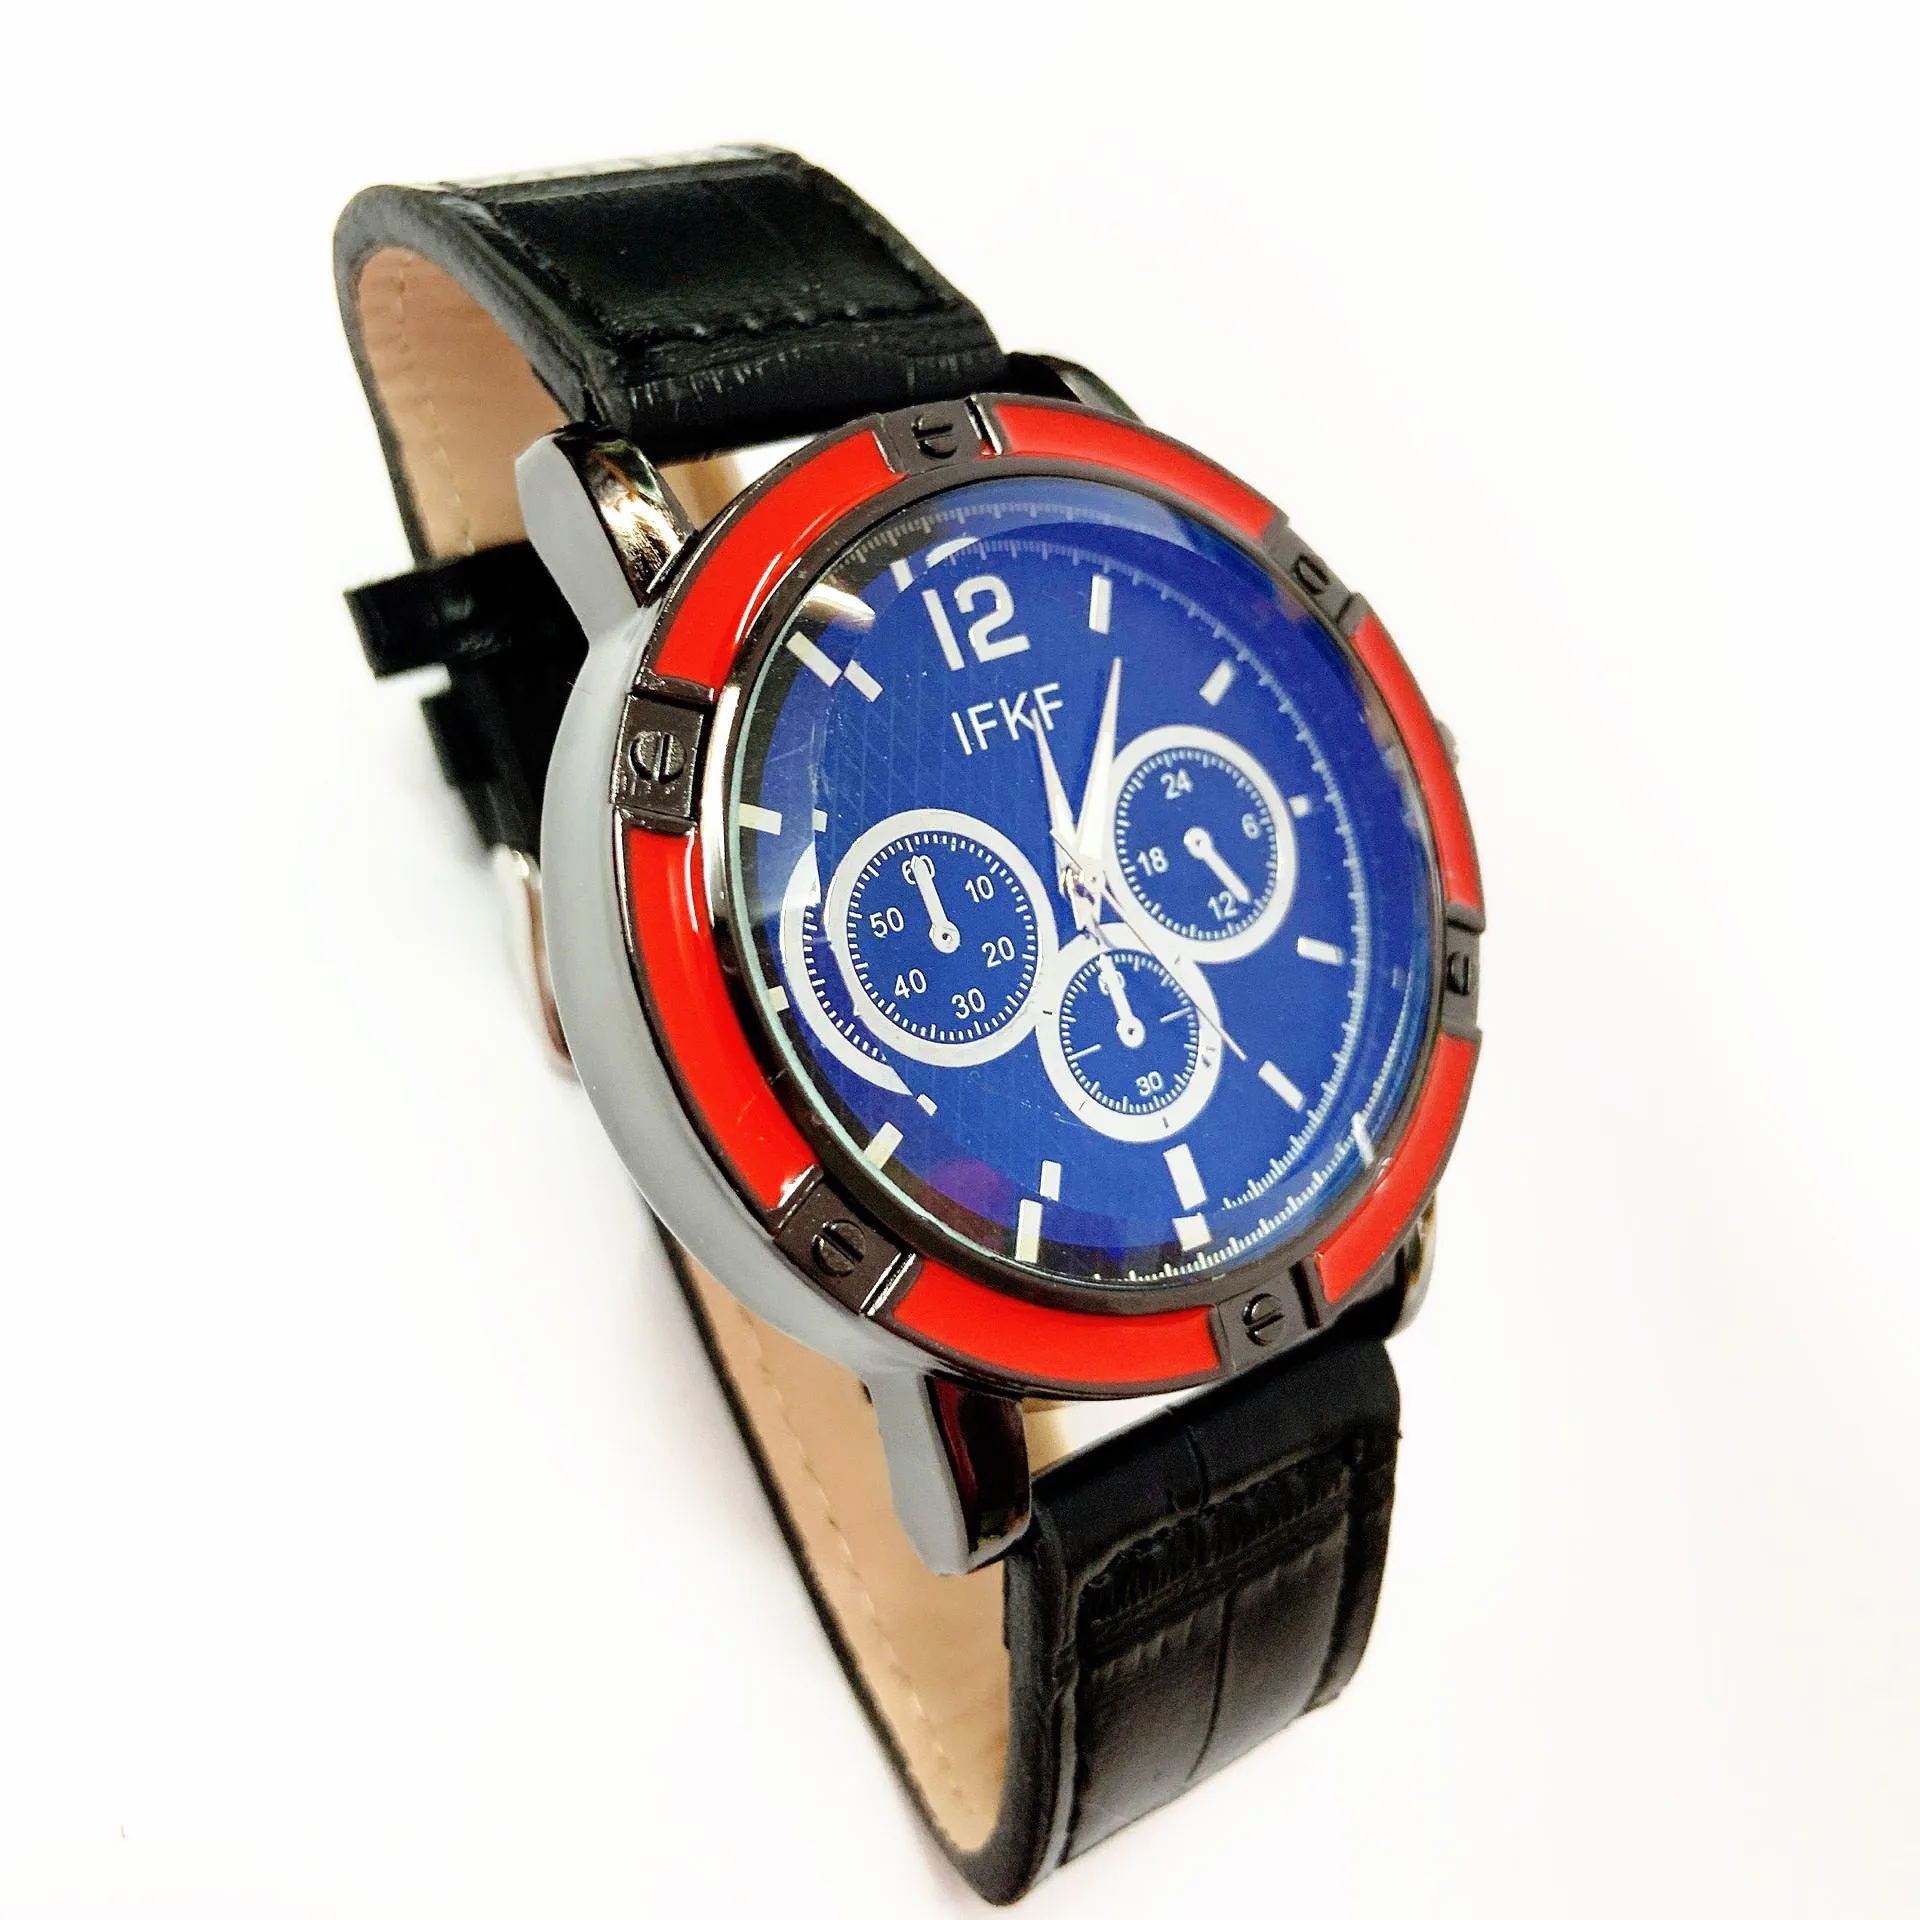 Stylish Couples Business Watches With Three People With Purple Eyes  Decorative Design, Large Dial, Alloy Body, And Two Color Quartz Movement  22W From Fuutao, $15.74 | DHgate.Com